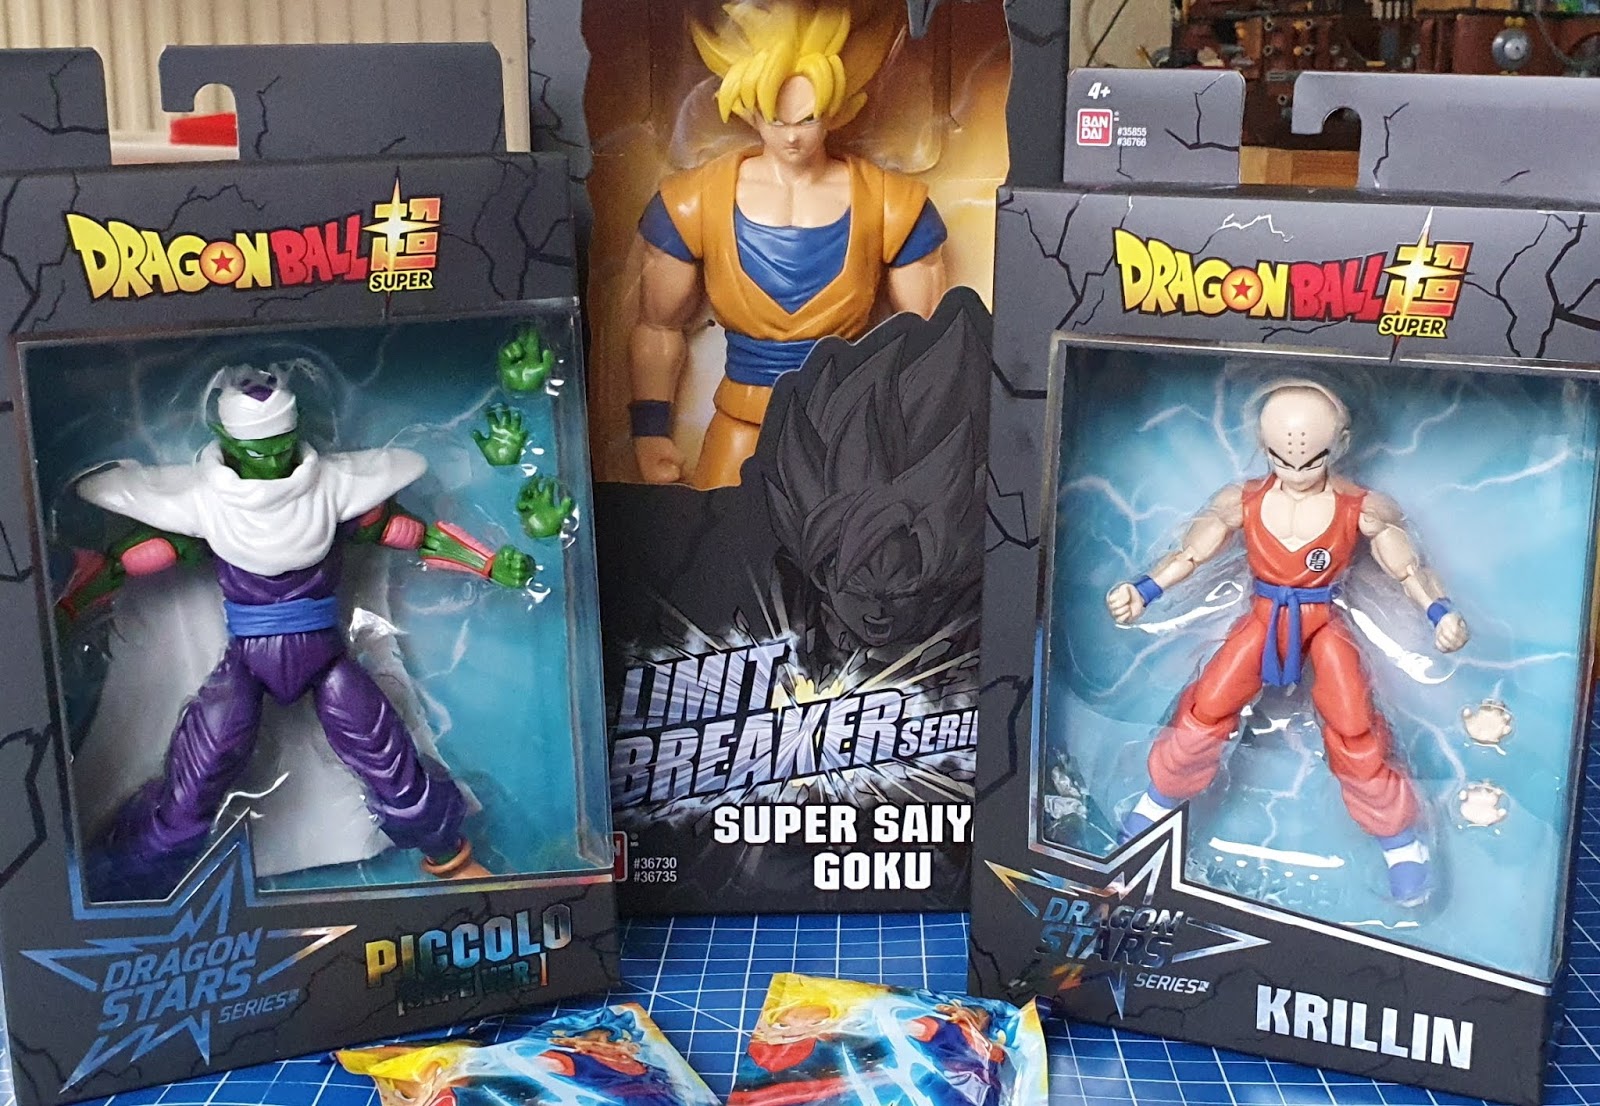 The Brick Castle: New Dragon Ball Toys Review (Sent by BandaiUK).